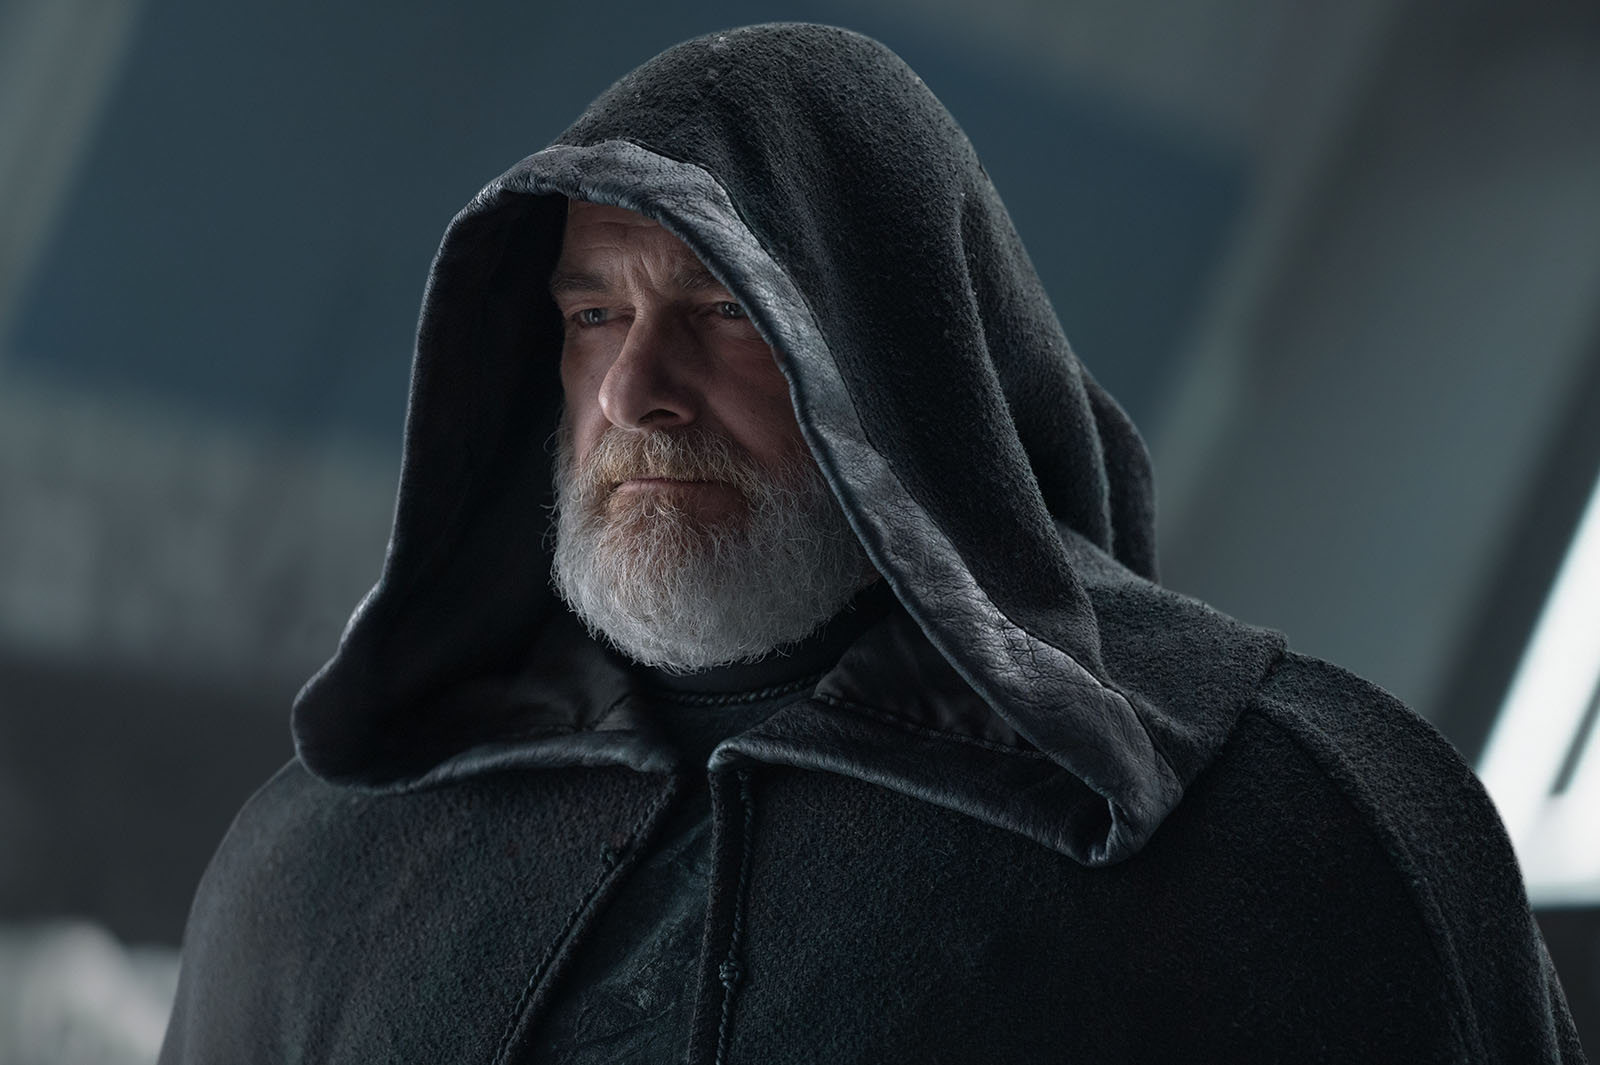 Ray Stevenson played Baylan Skoll, a former Jedi Knight who has turned to the dark side. Image © Disney